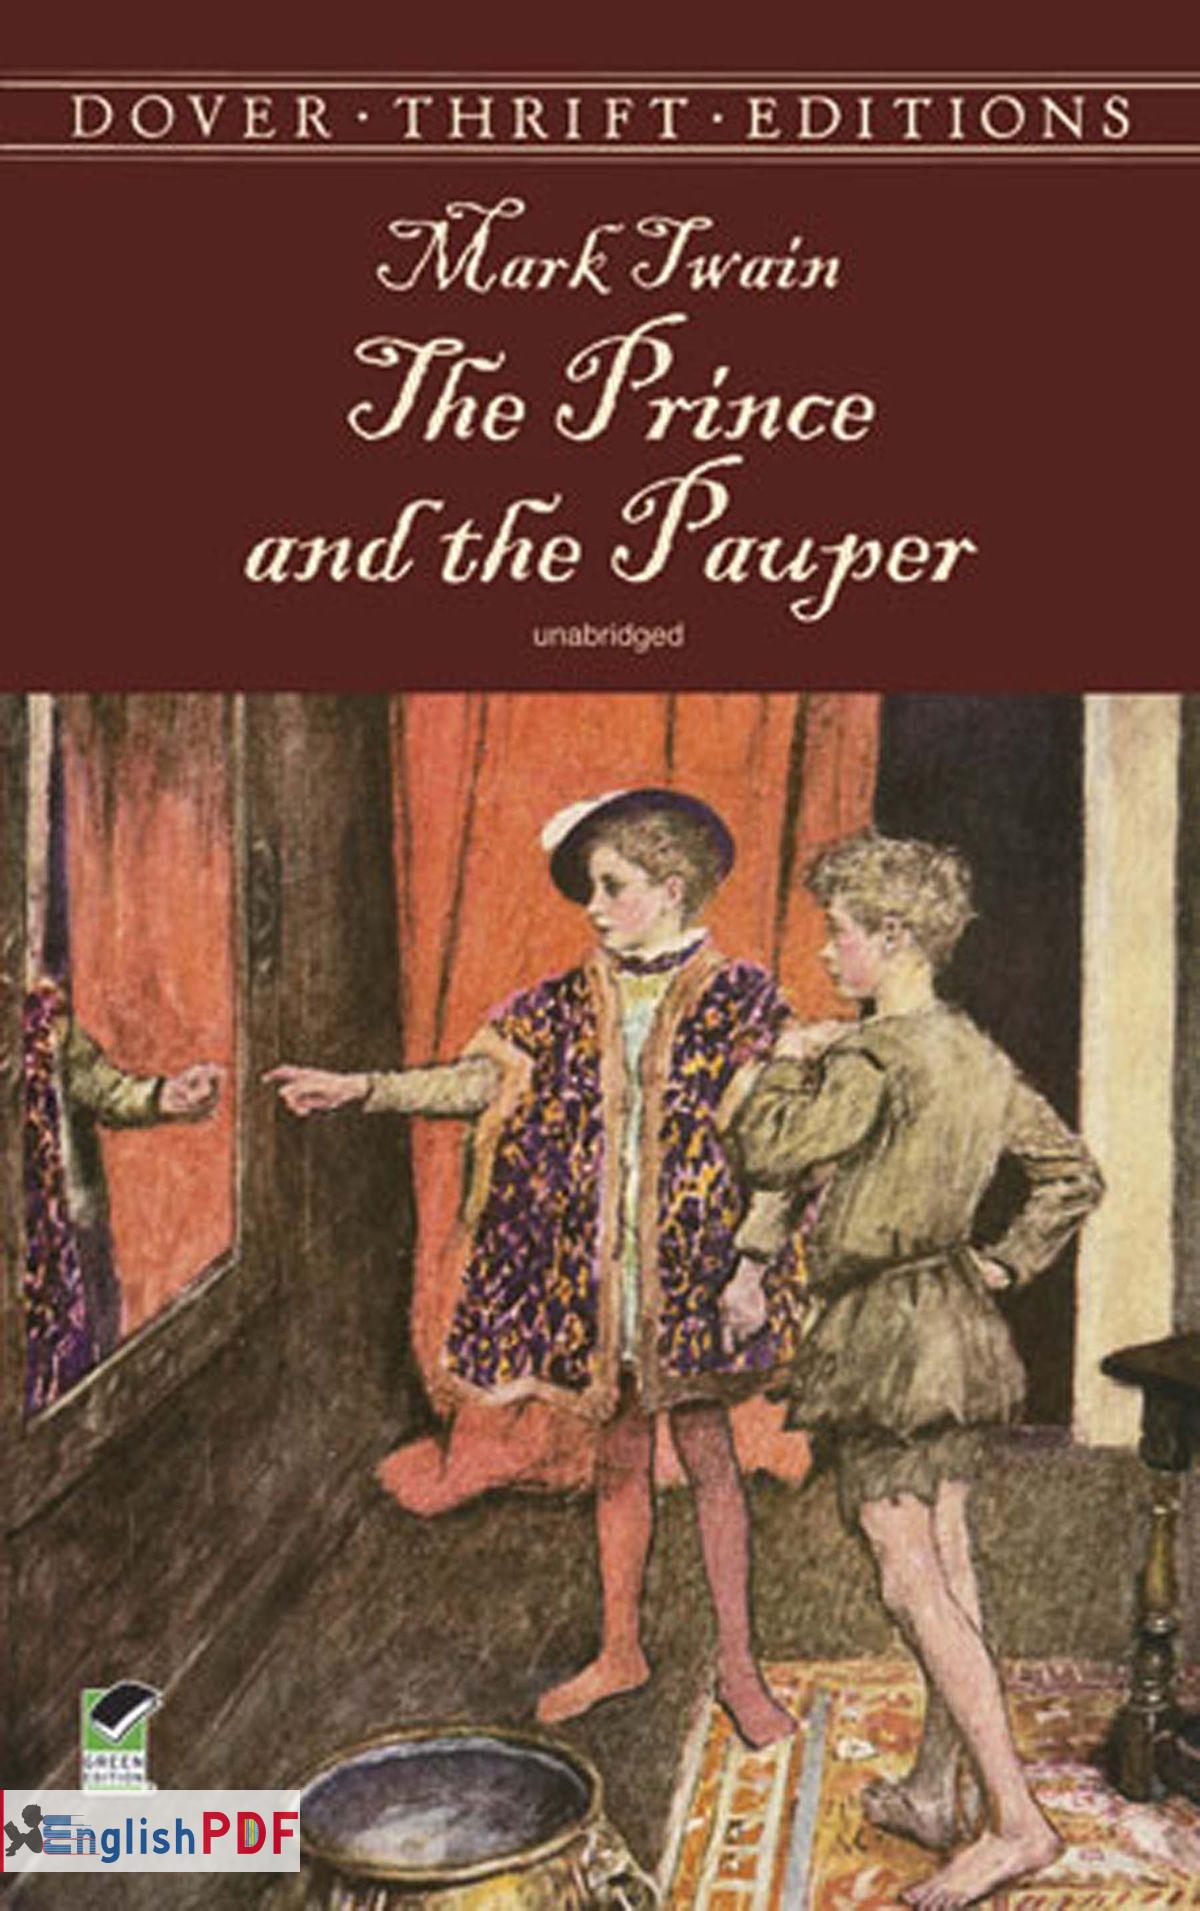 The Prince and the Pauper PDF Download PDF By EnglishPDF